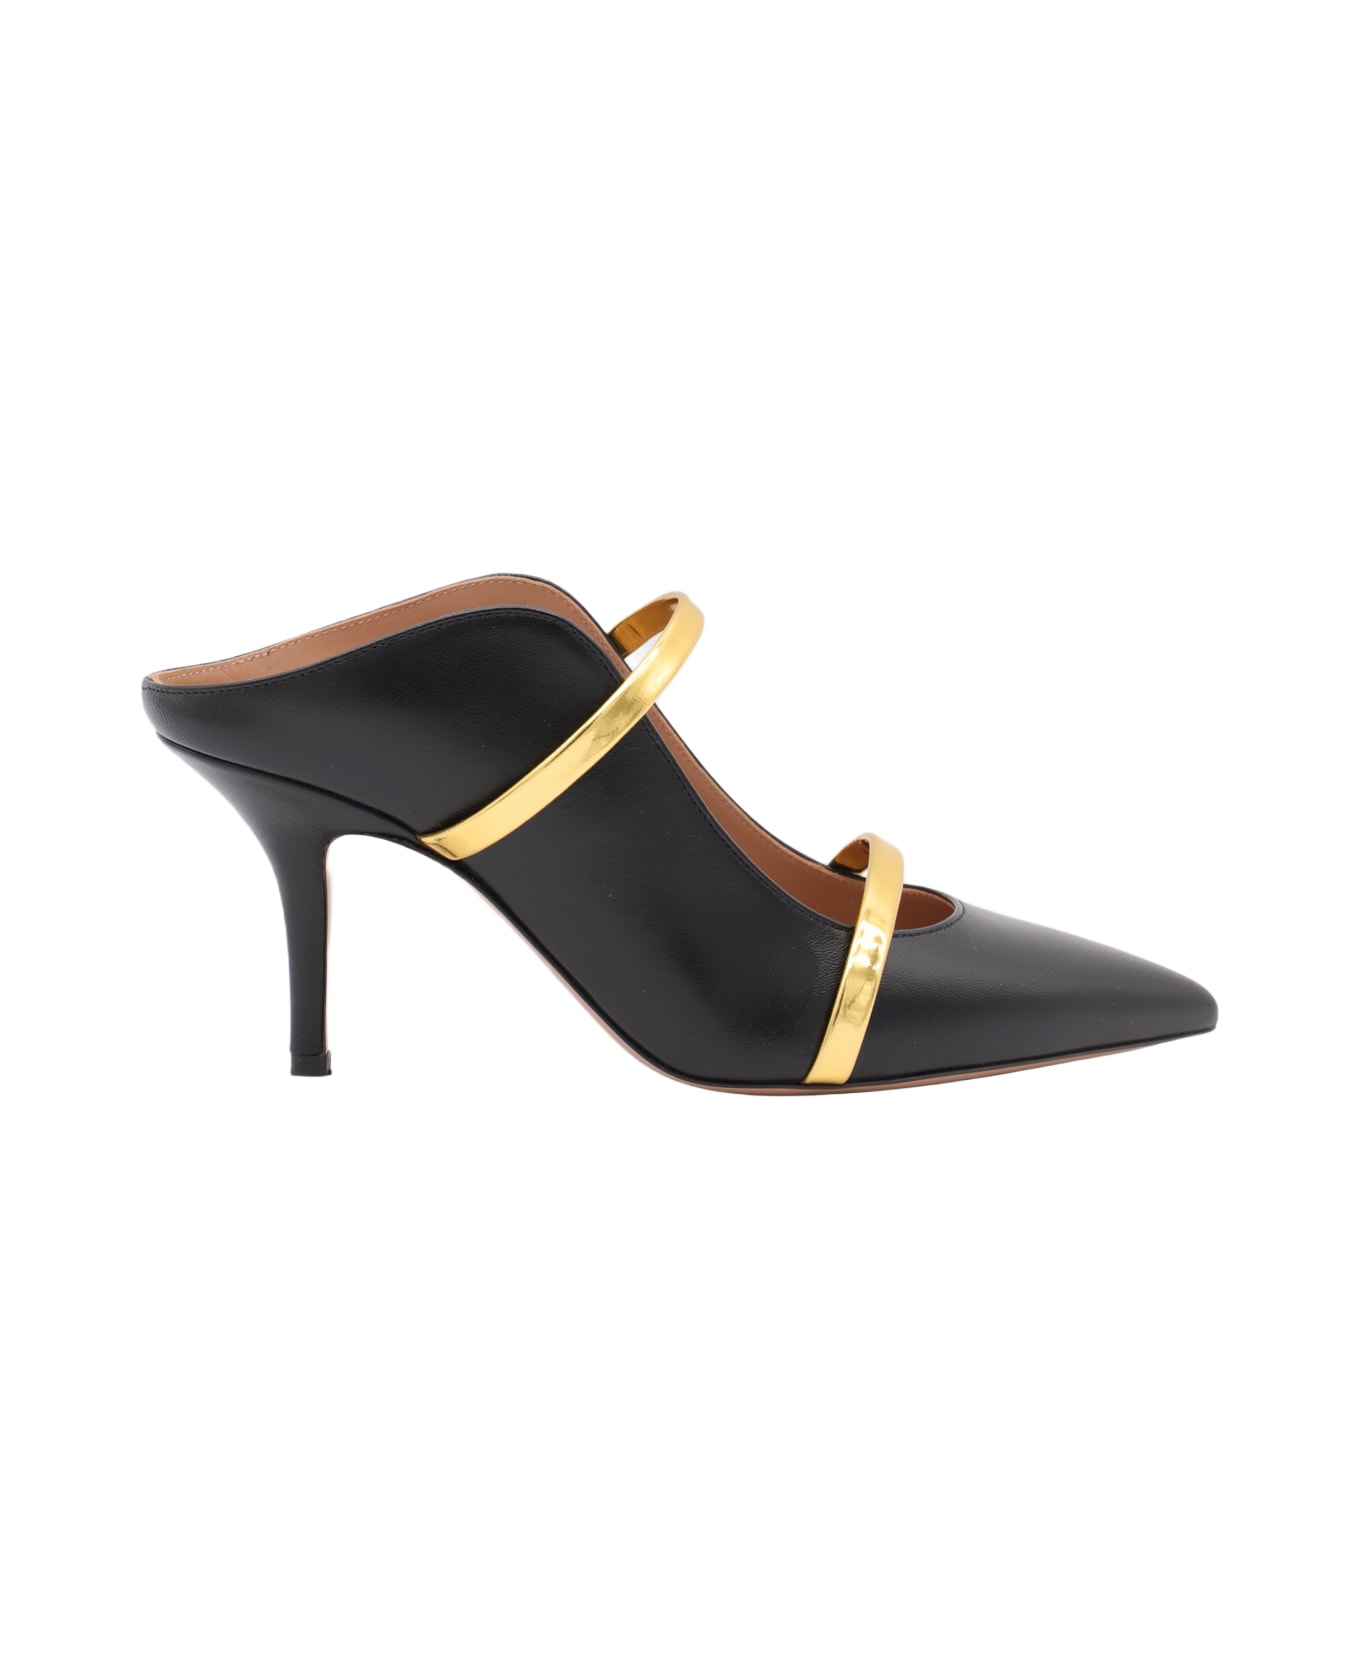 Malone Souliers Black And Gold Leather Maureen Pumps - Black